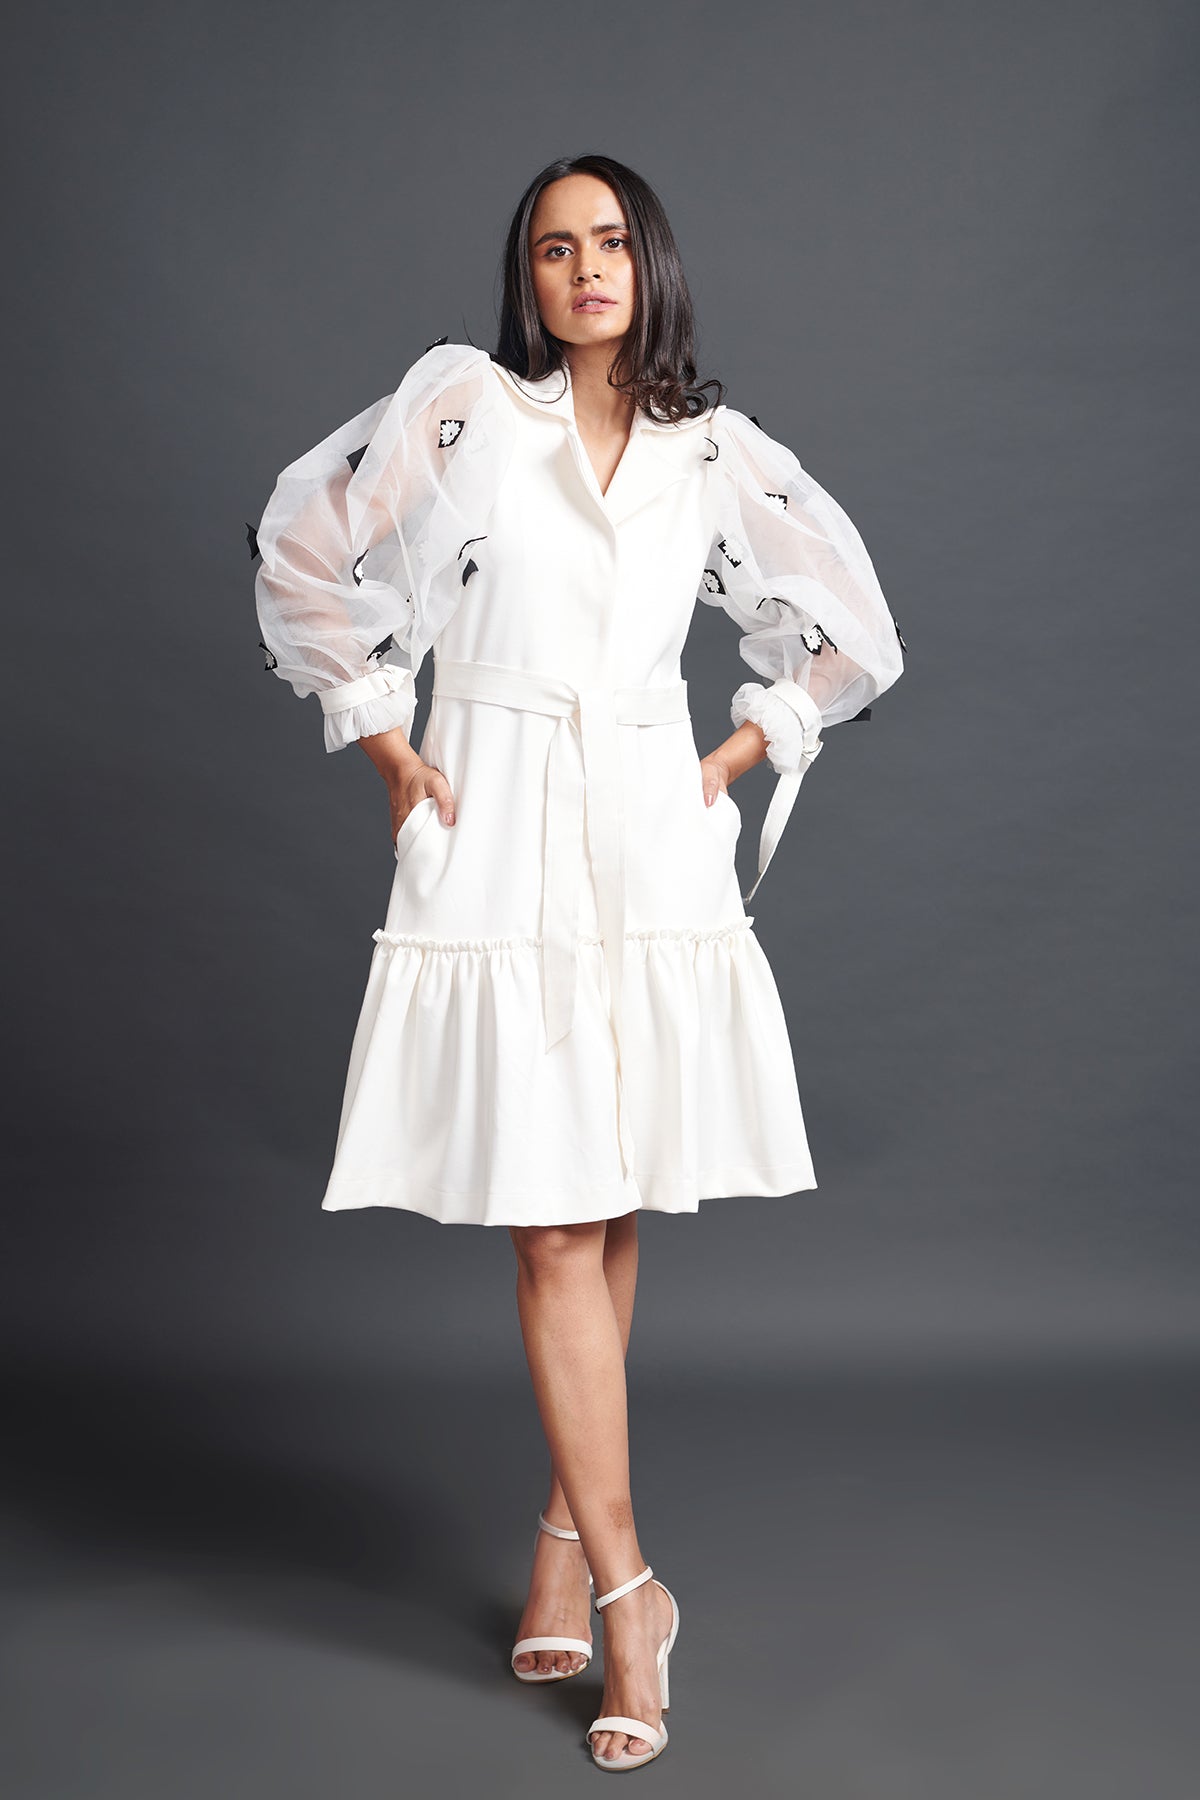 Image of WHITE JACKET DRESS WITH CUTWORK ON PUFFED SLEEVES. From savoirfashions.com 